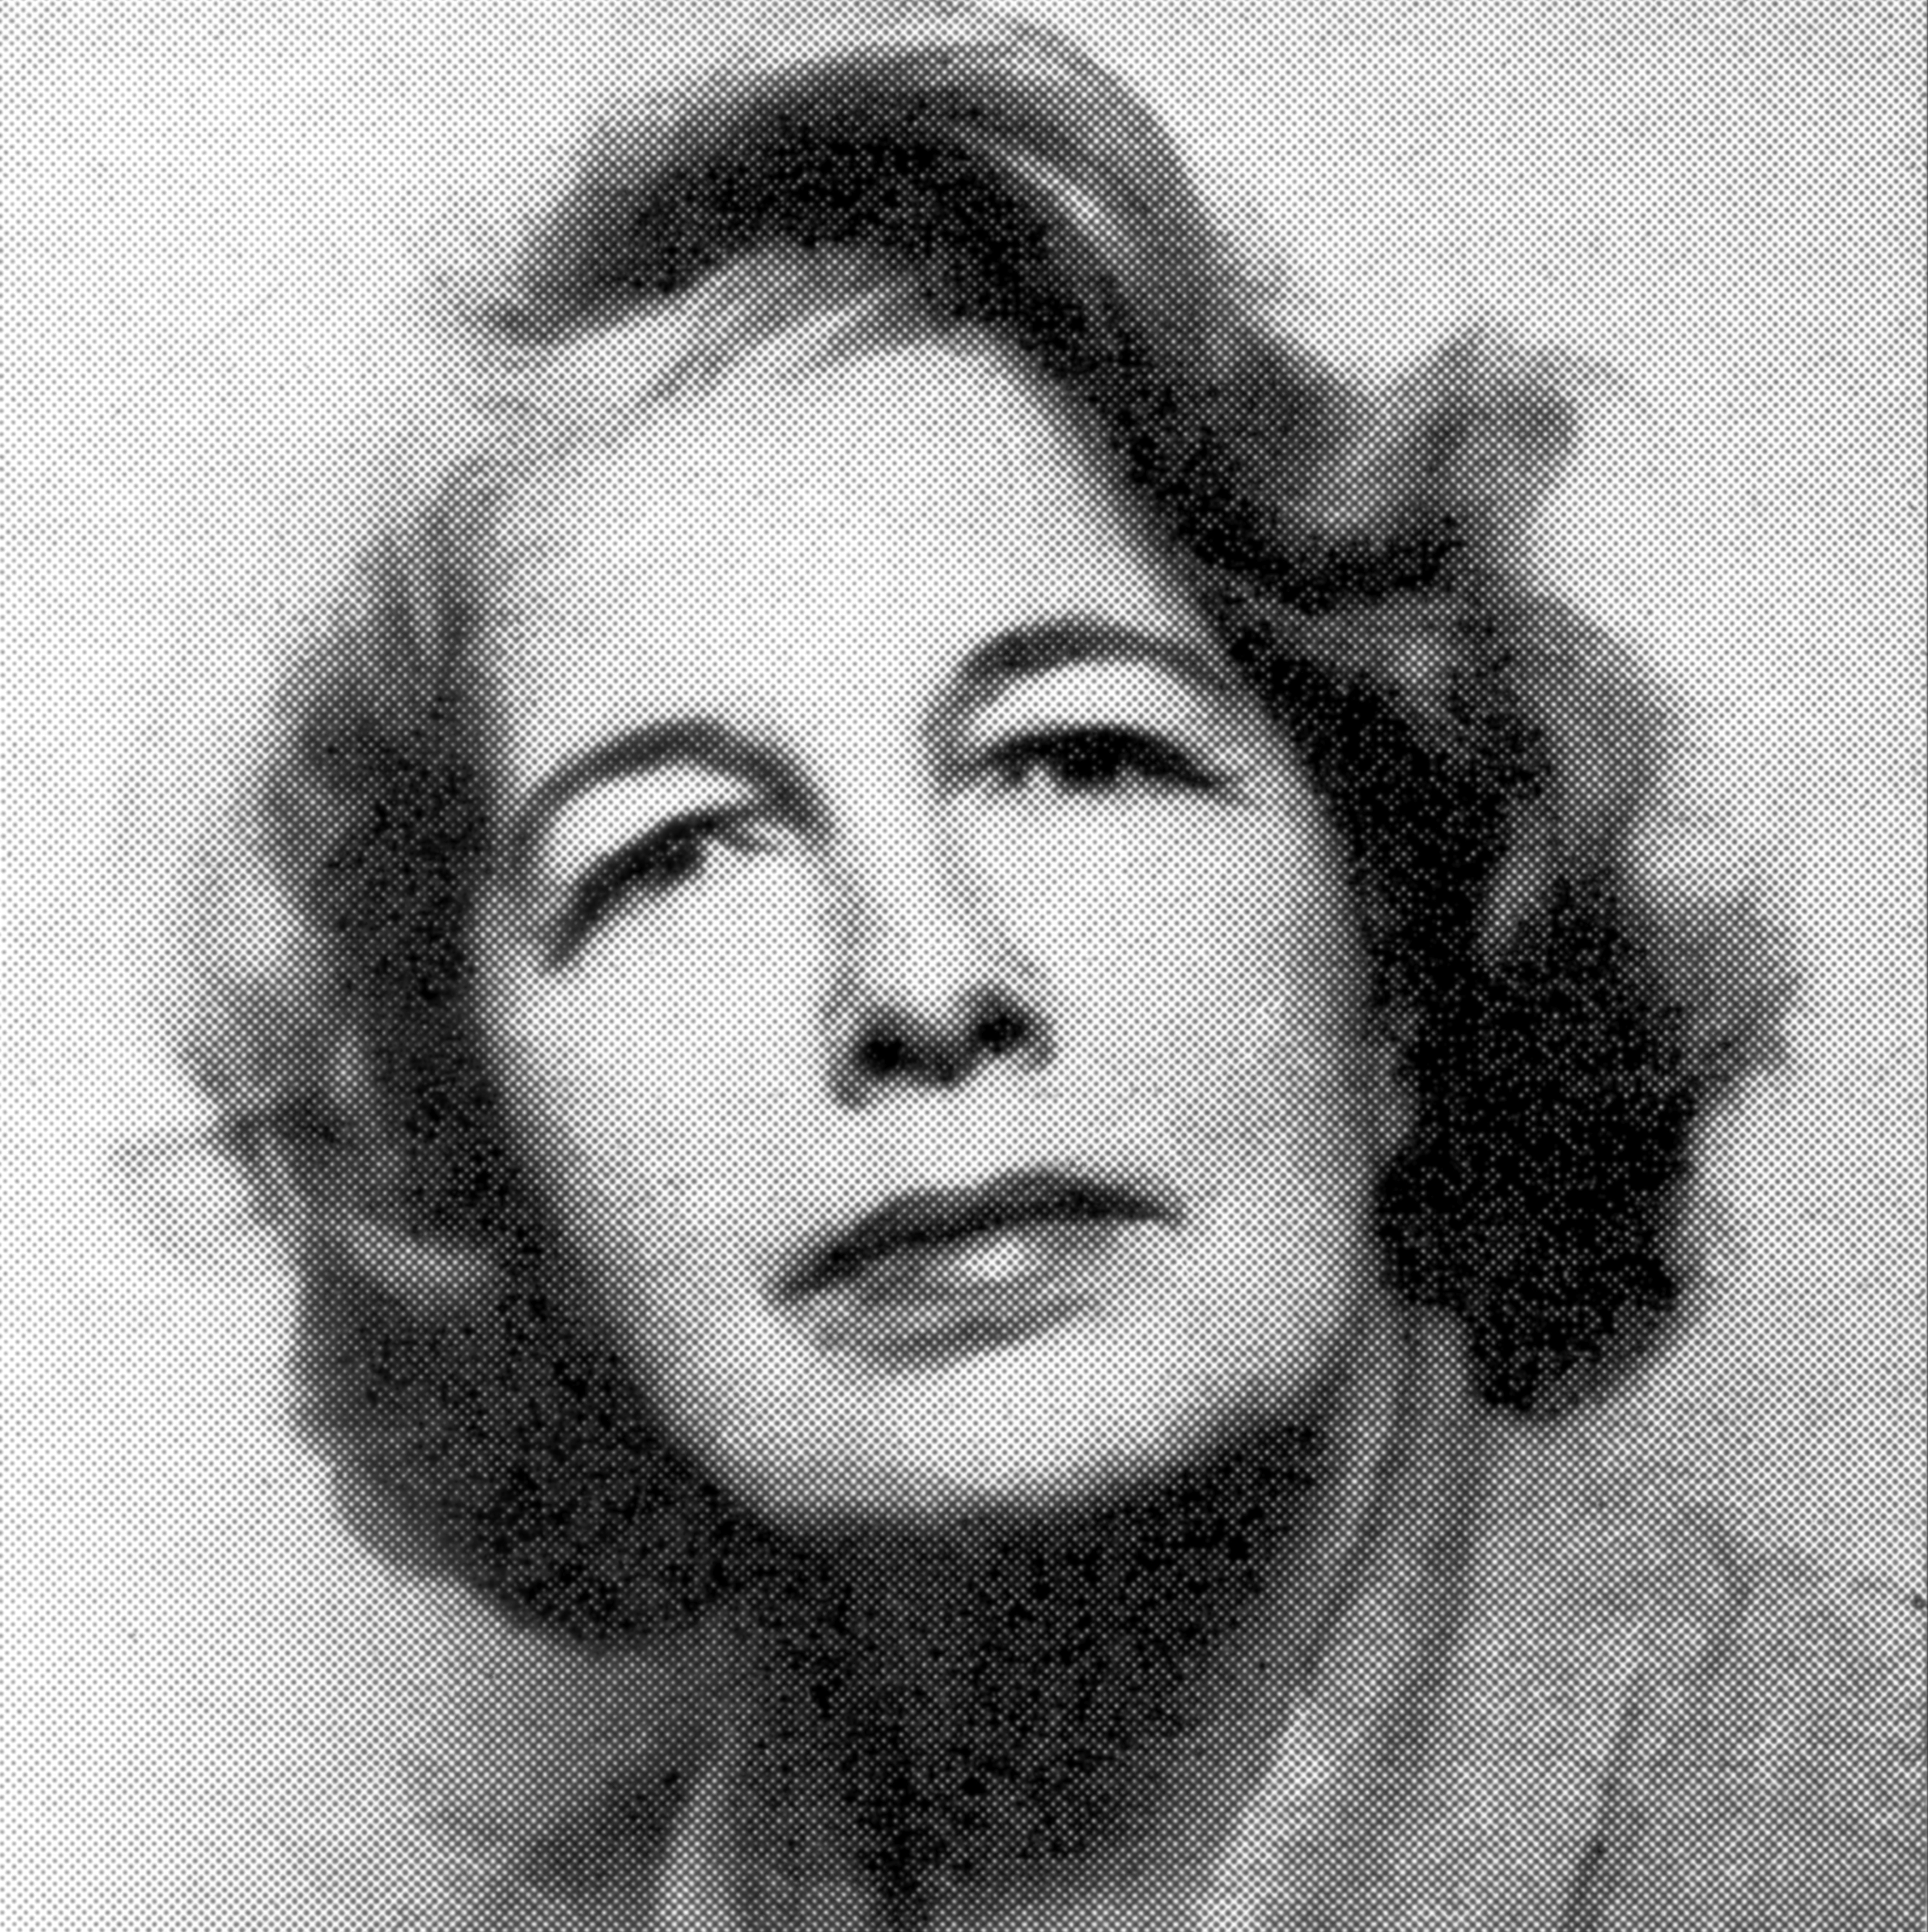 Photo of Arlene Butterly which has been scanned in from a printed copy of the NIH Record